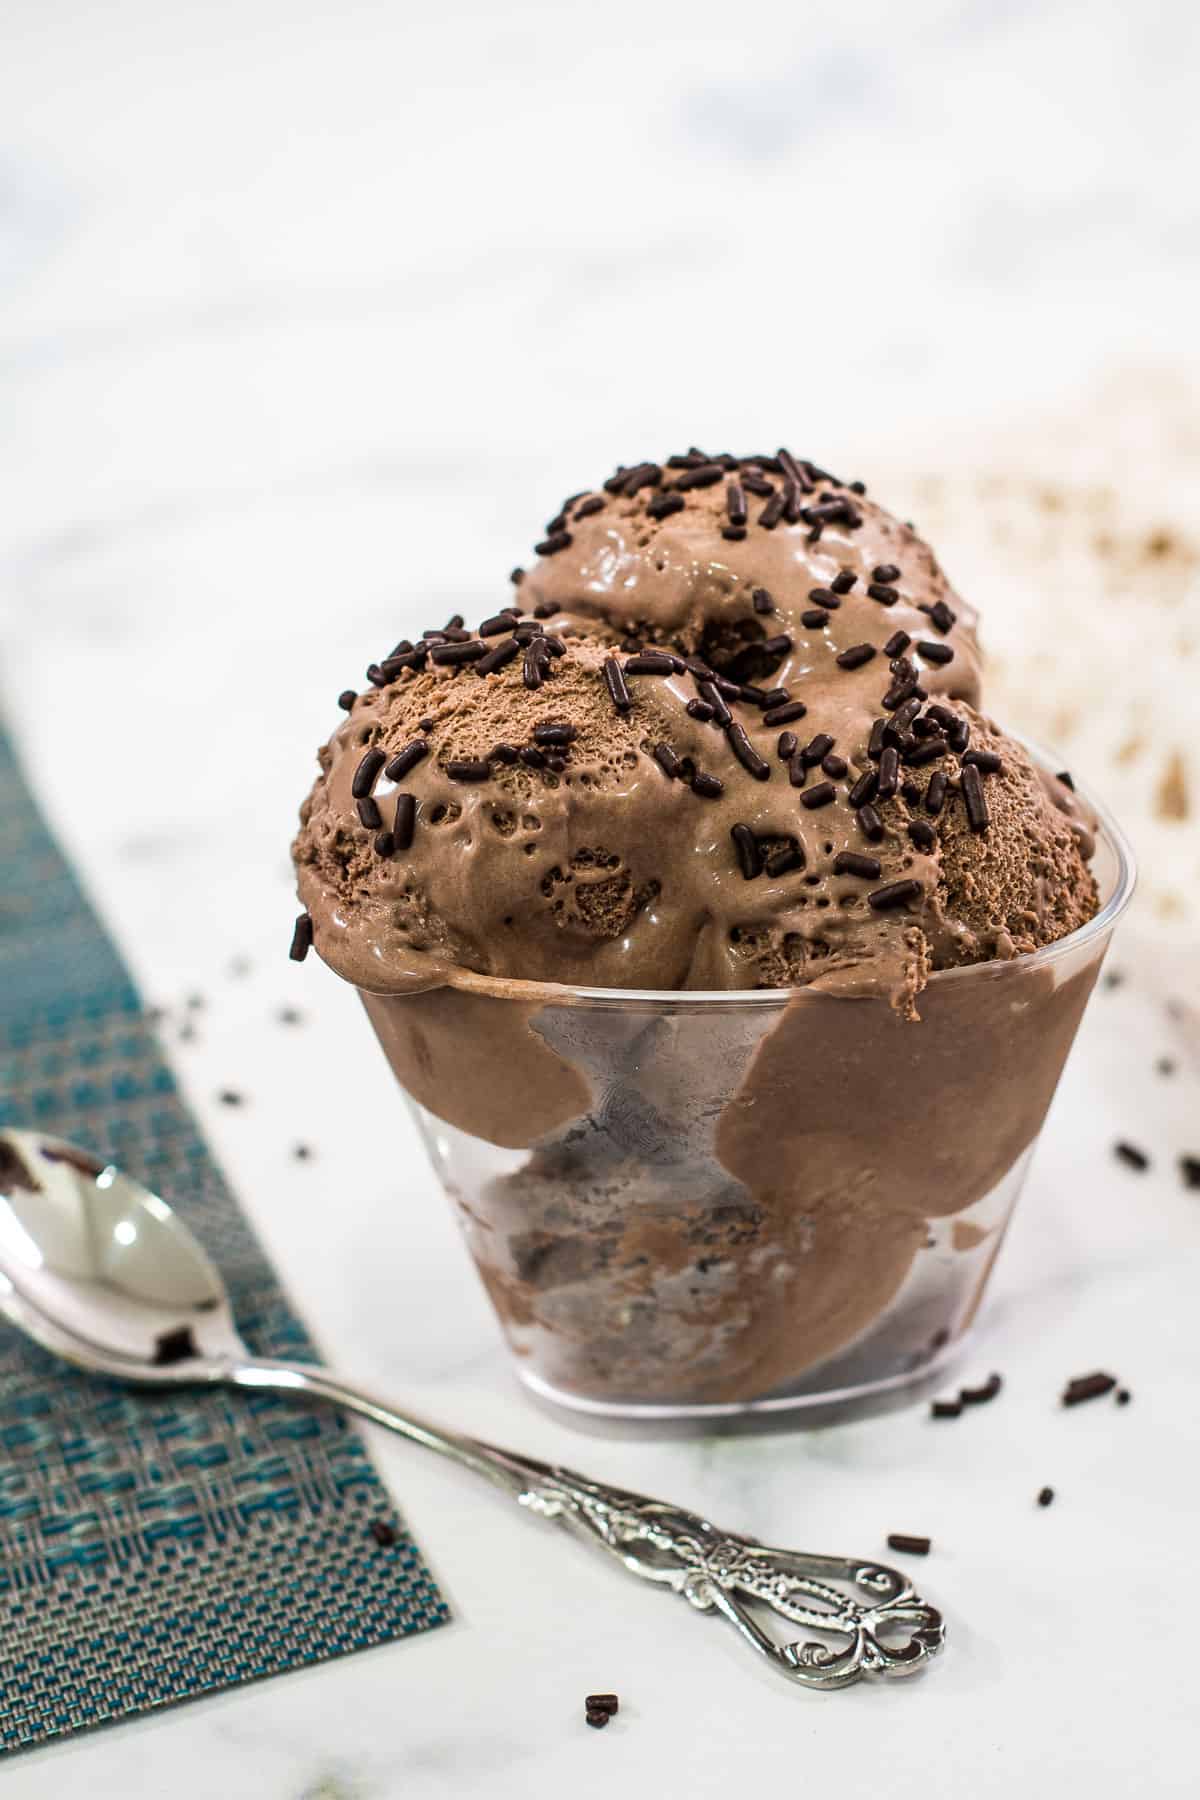 A dessert bowl filled with chocolate ice cream that is topped with chocolate sprinkles